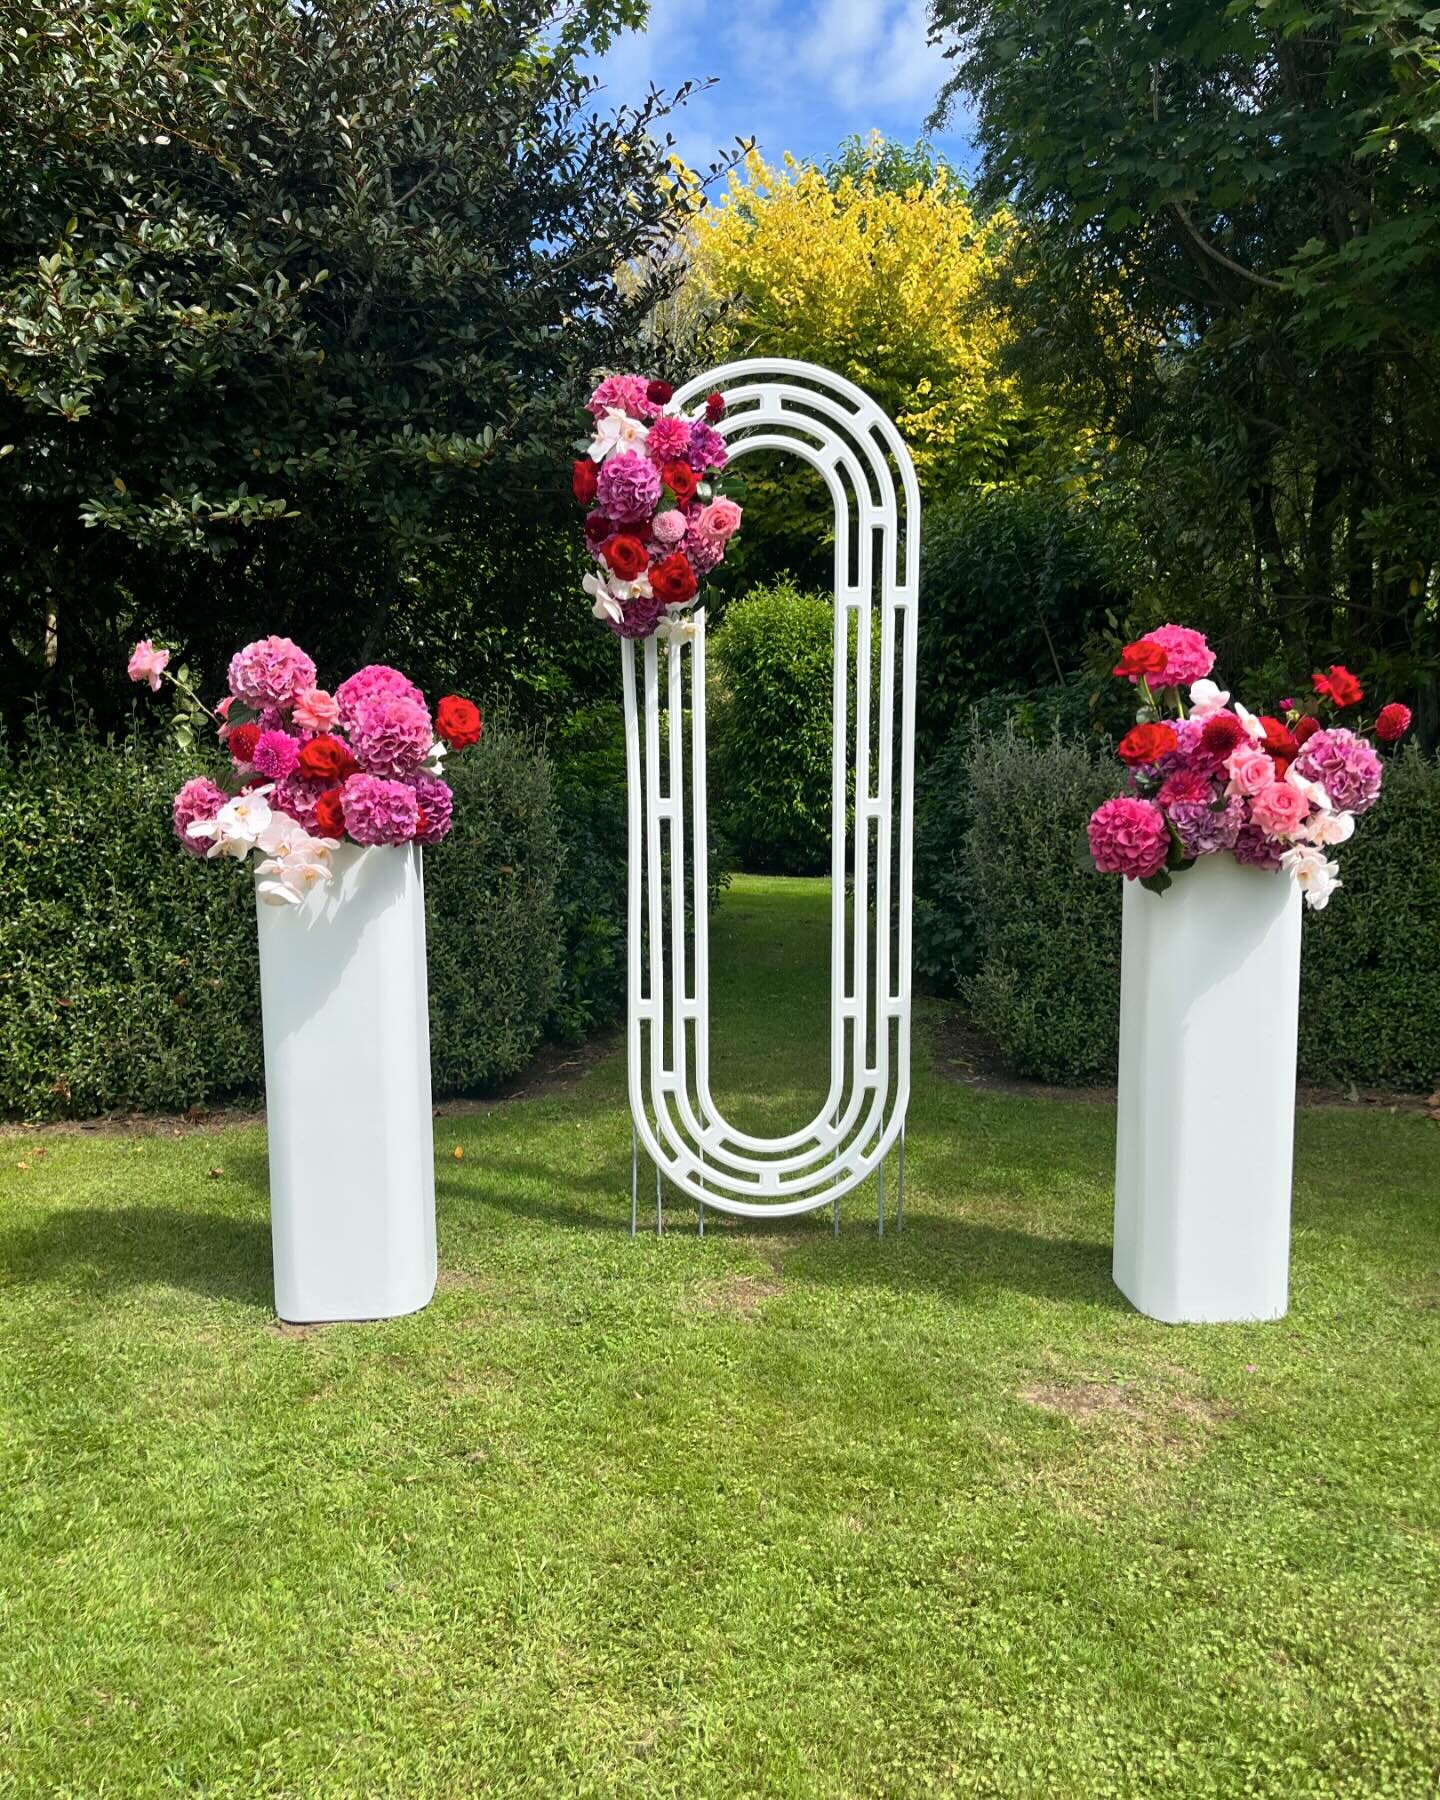 Our white plinths and geometric archway looking all fancy for Courtney and Rowans wedding at the Waiongana gardens yesterday 🌹🌸 
Full size and half size plinths available

Florals by @pineapplesage_florist 
Celebrant @weddings_byemily 
Venue @waion